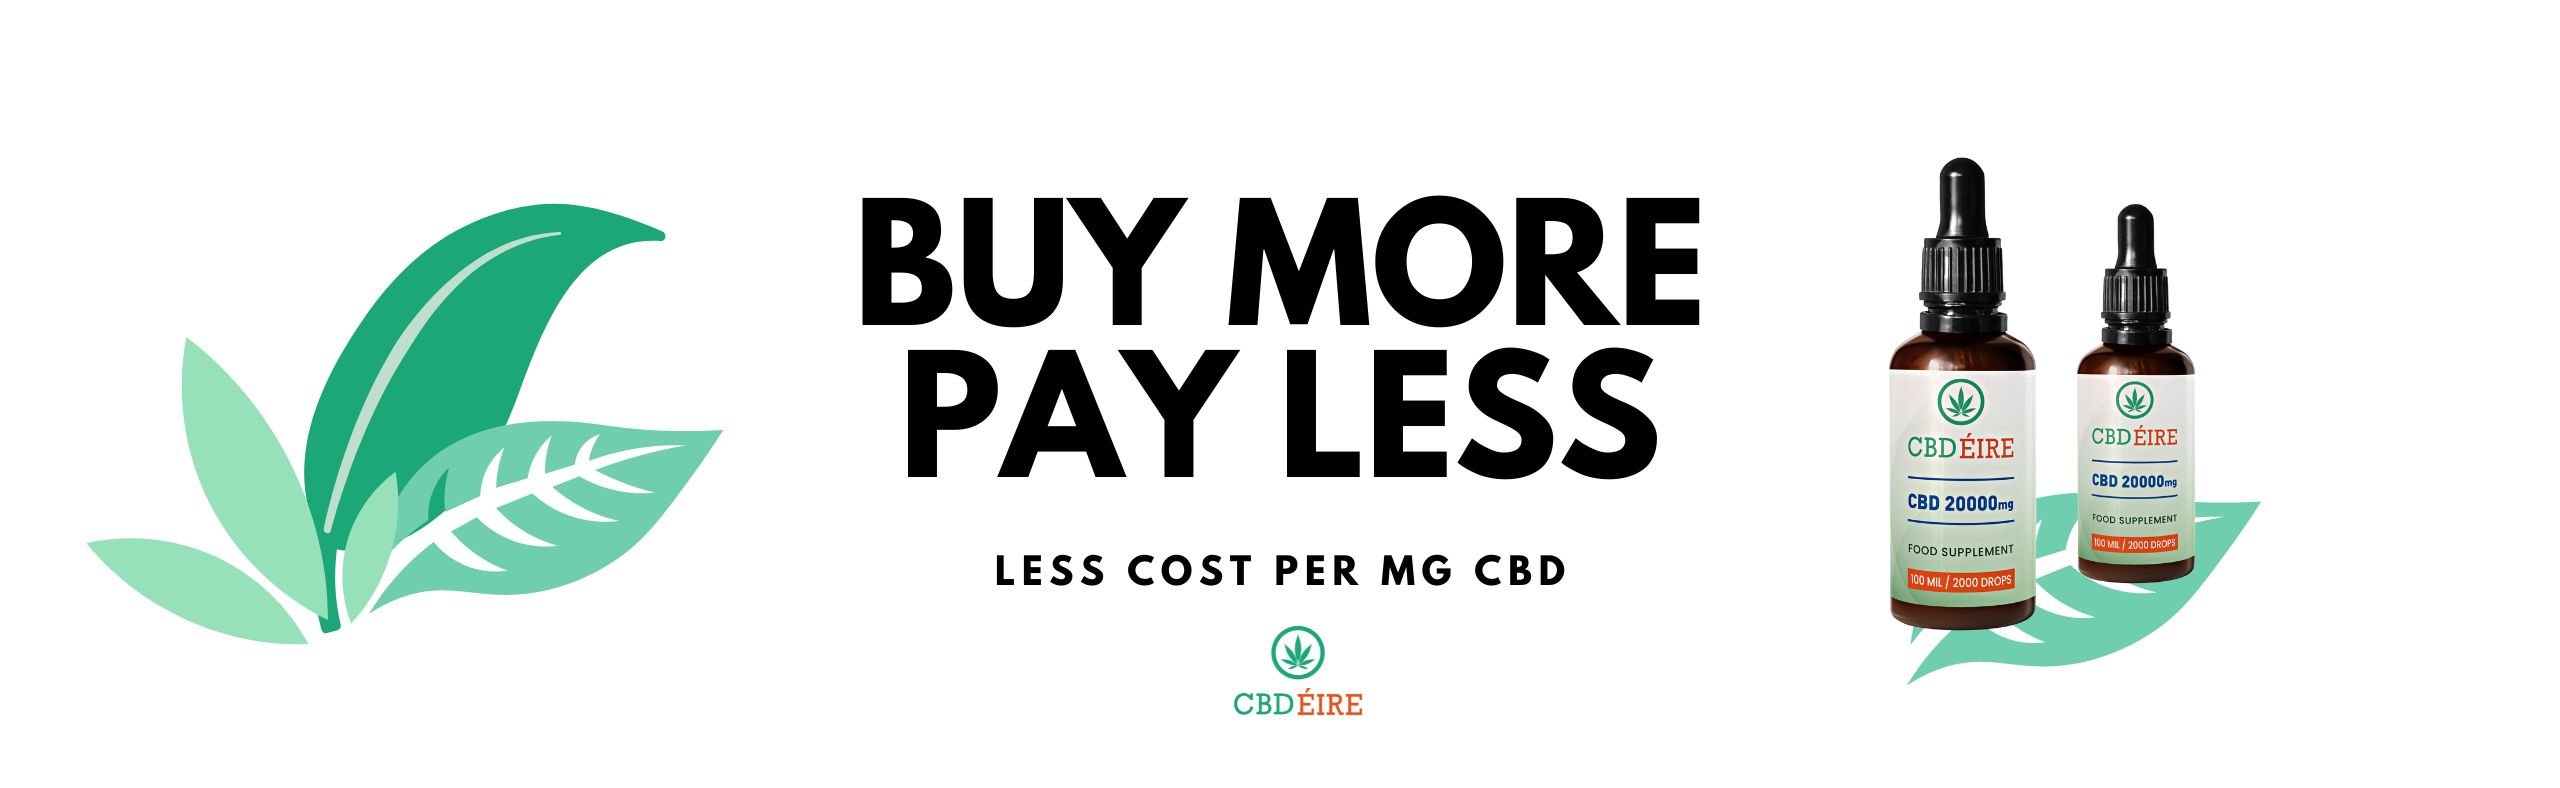 CBD EIRE BANNER Buy More Pay Less